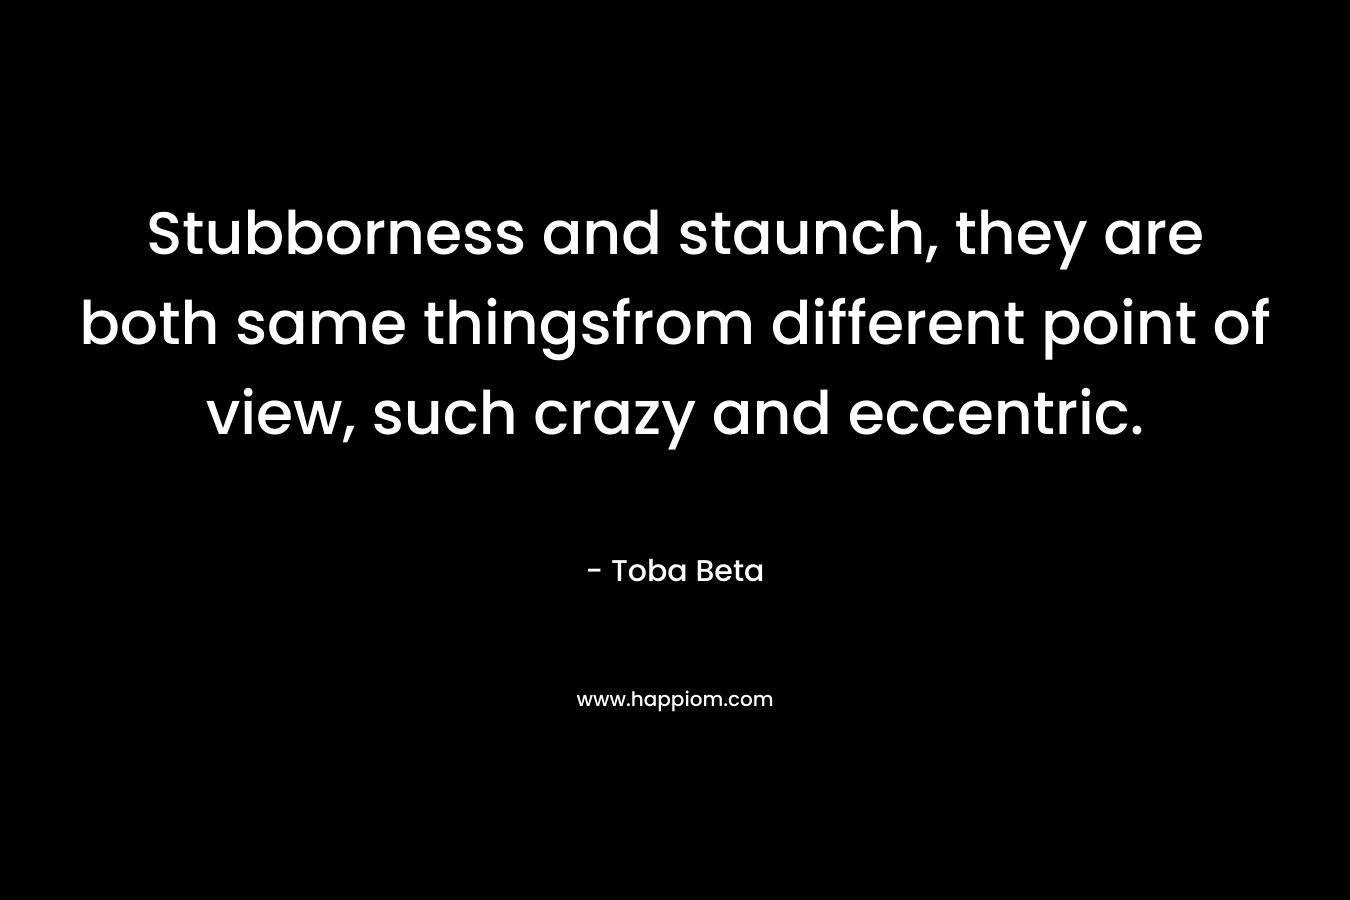 Stubborness and staunch, they are both same thingsfrom different point of view, such crazy and eccentric.